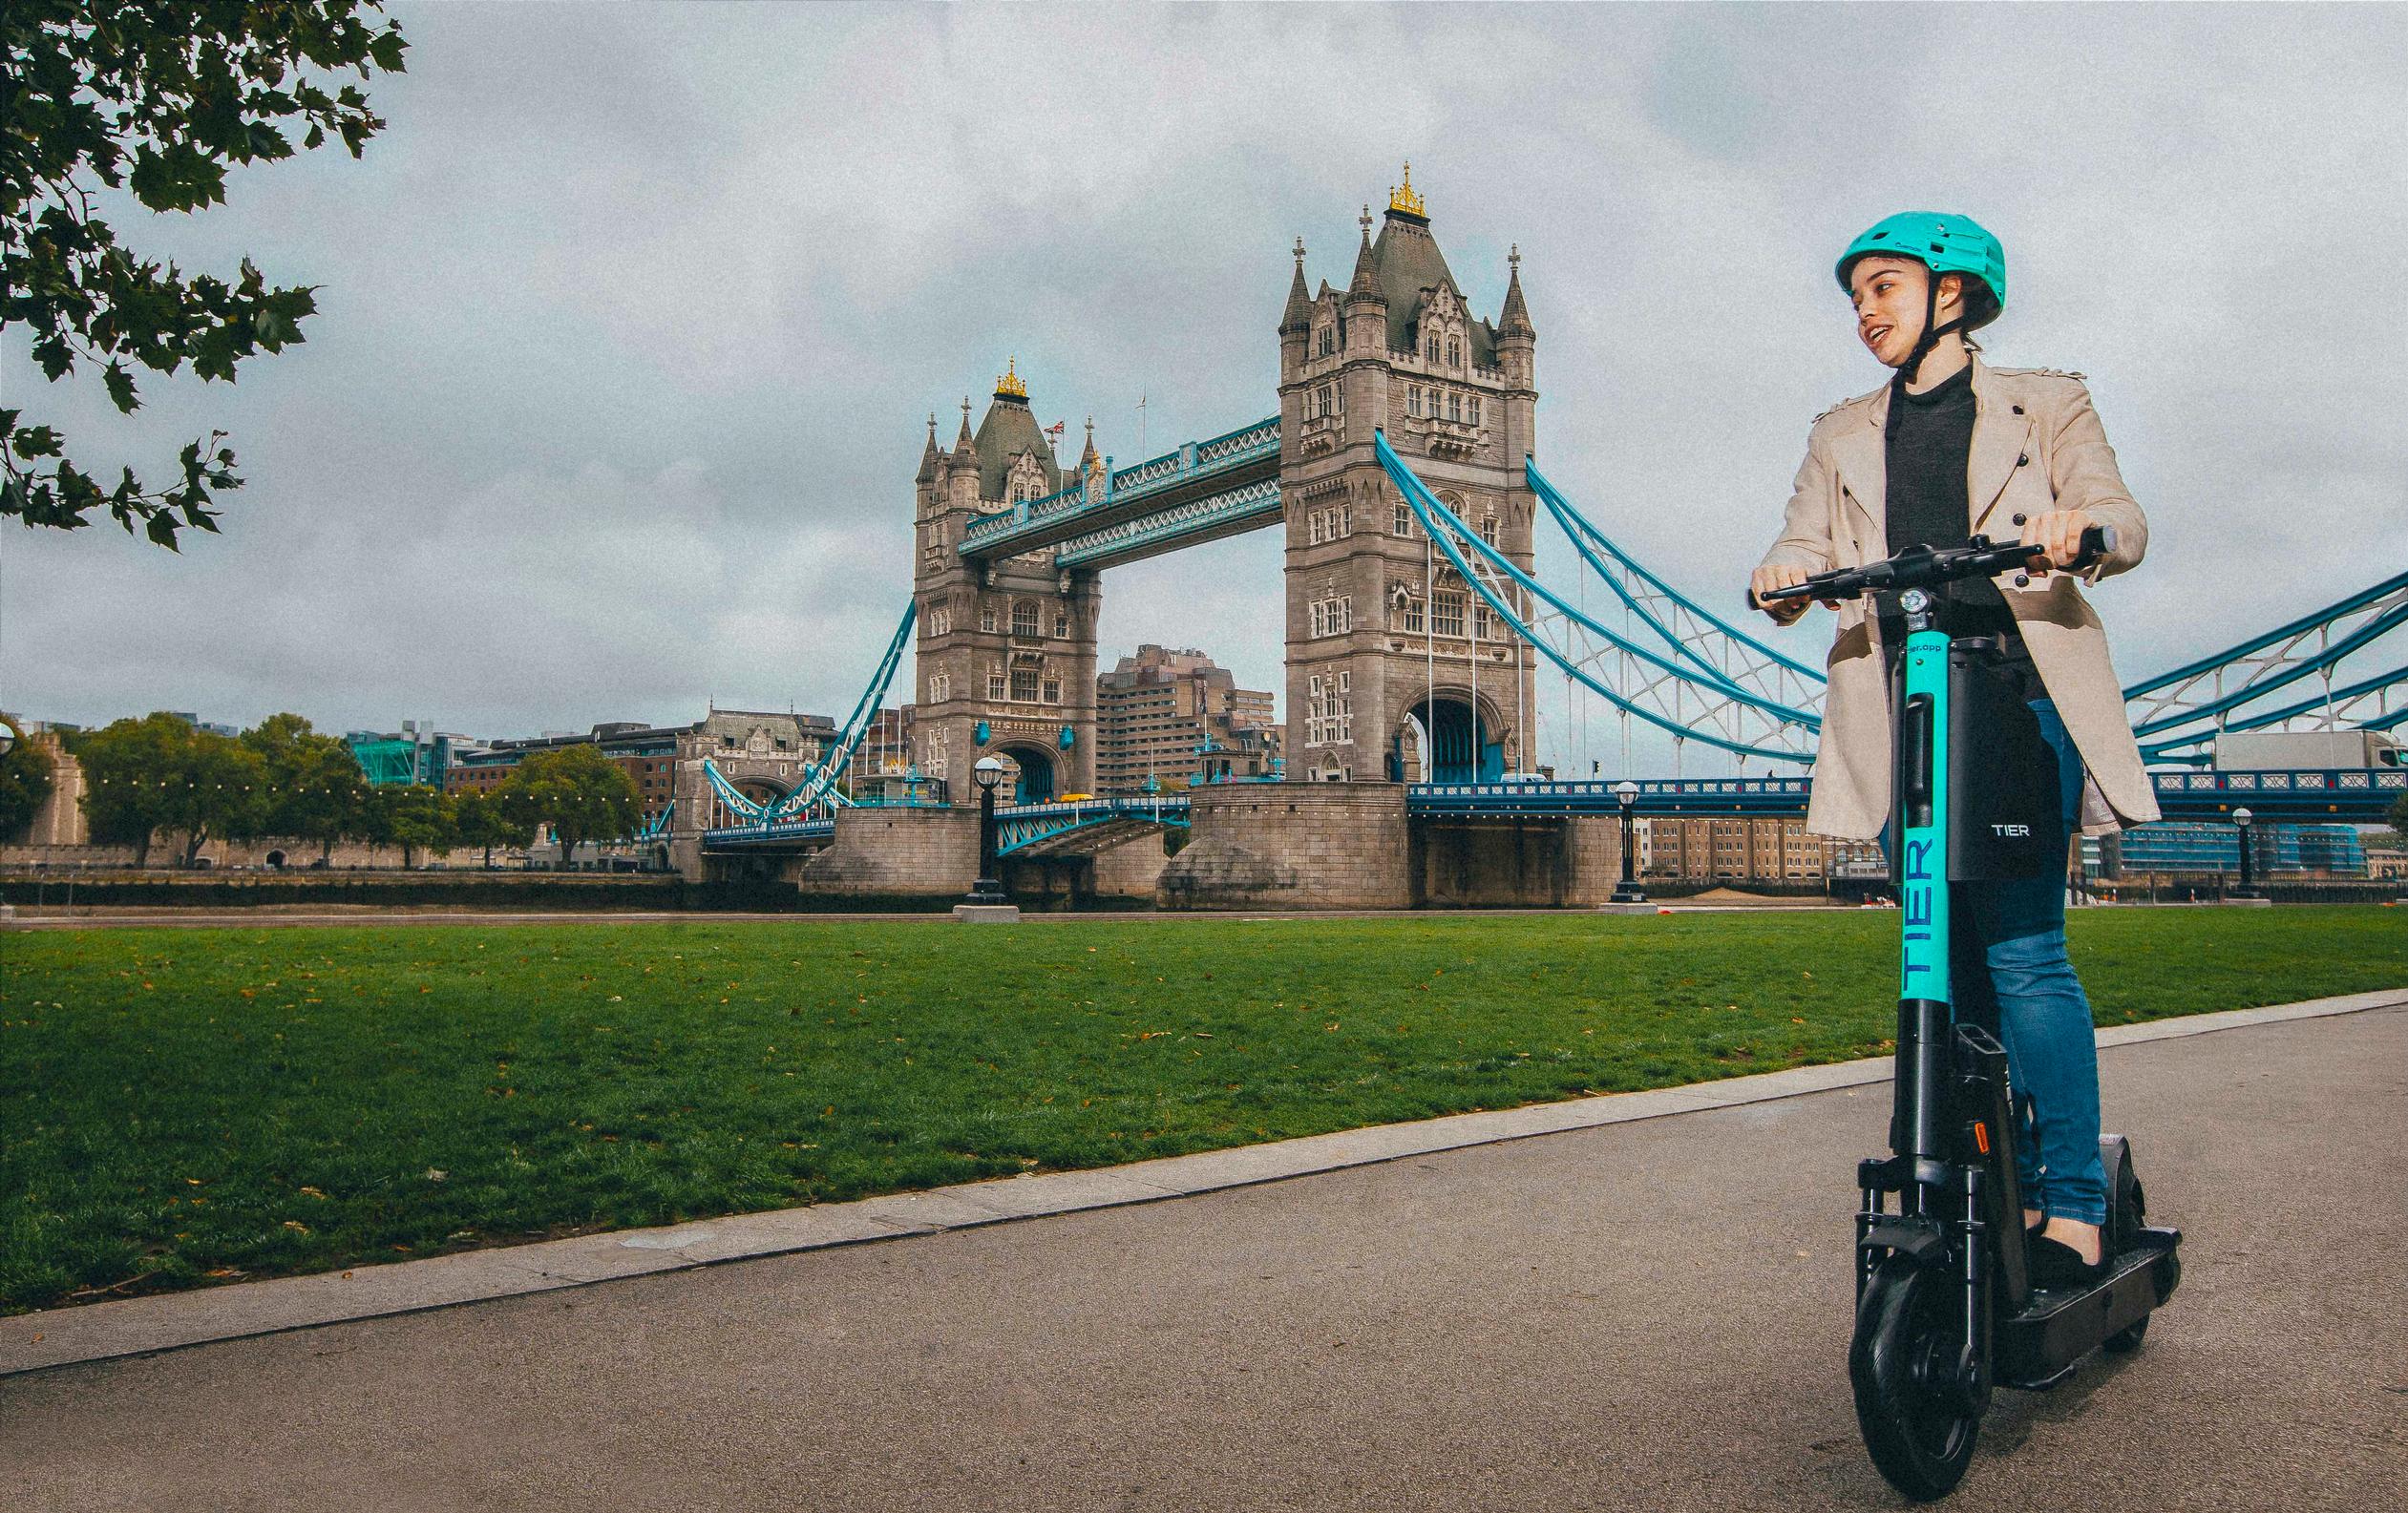 City of London is one of the authorities taking part in the e-bike rental trial